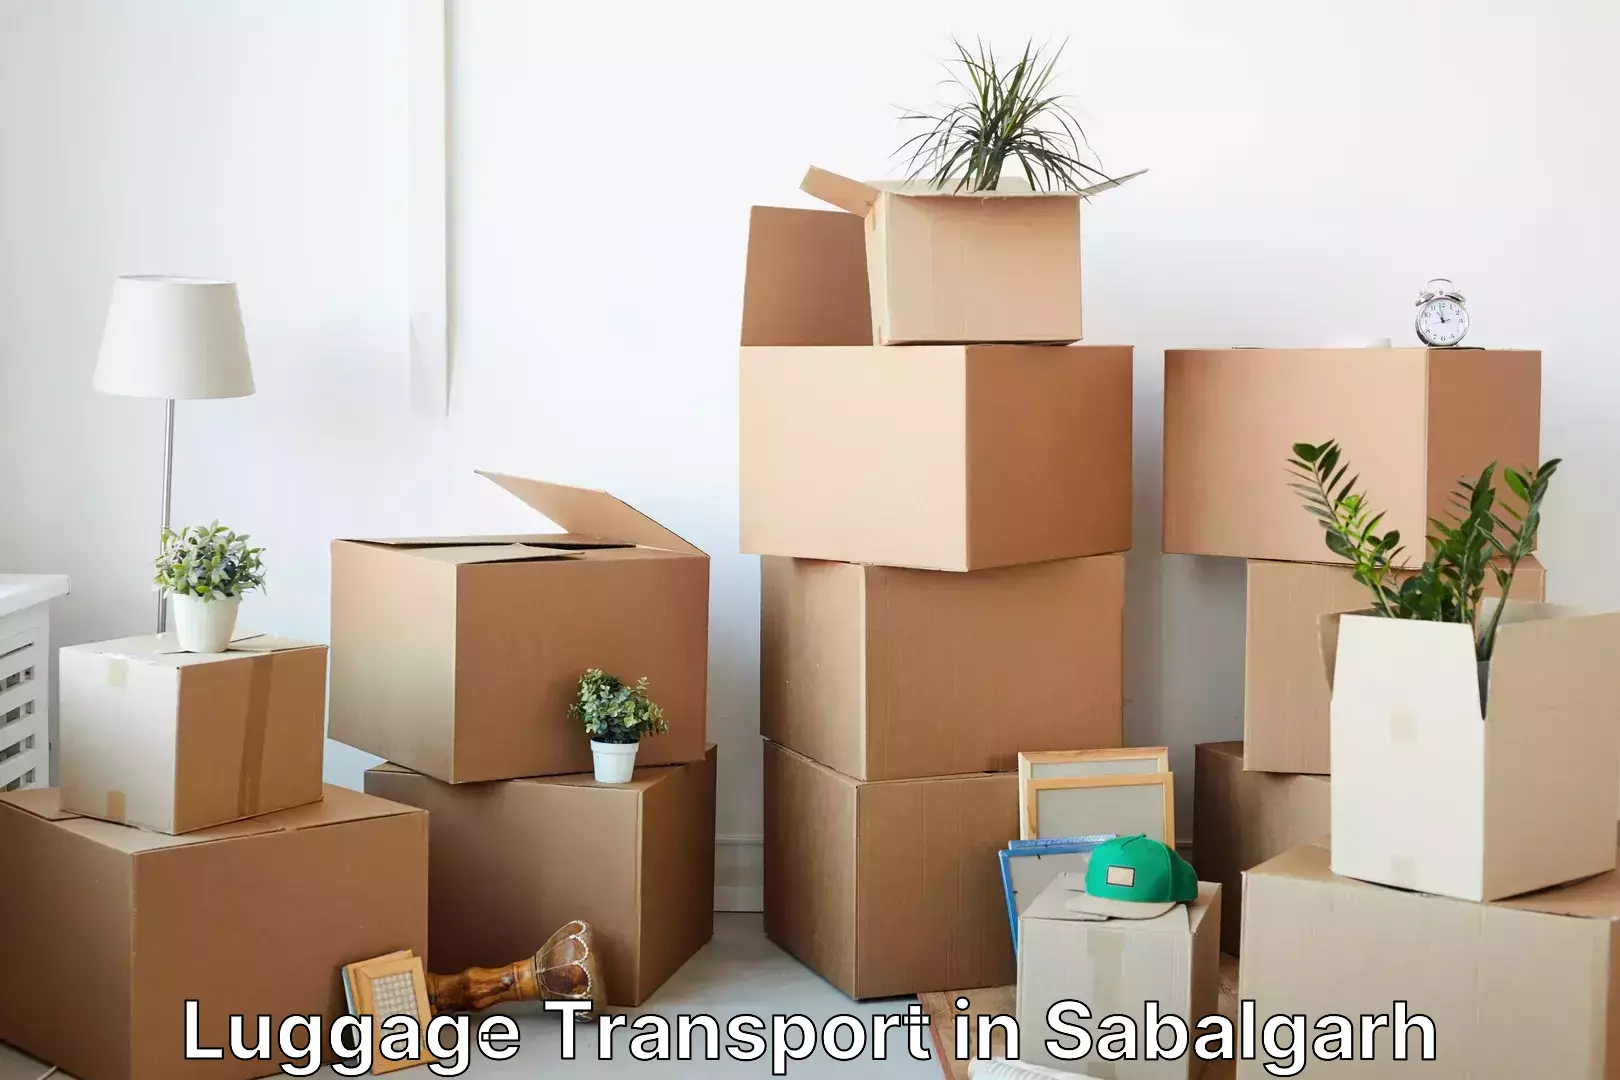 Express luggage delivery in Sabalgarh